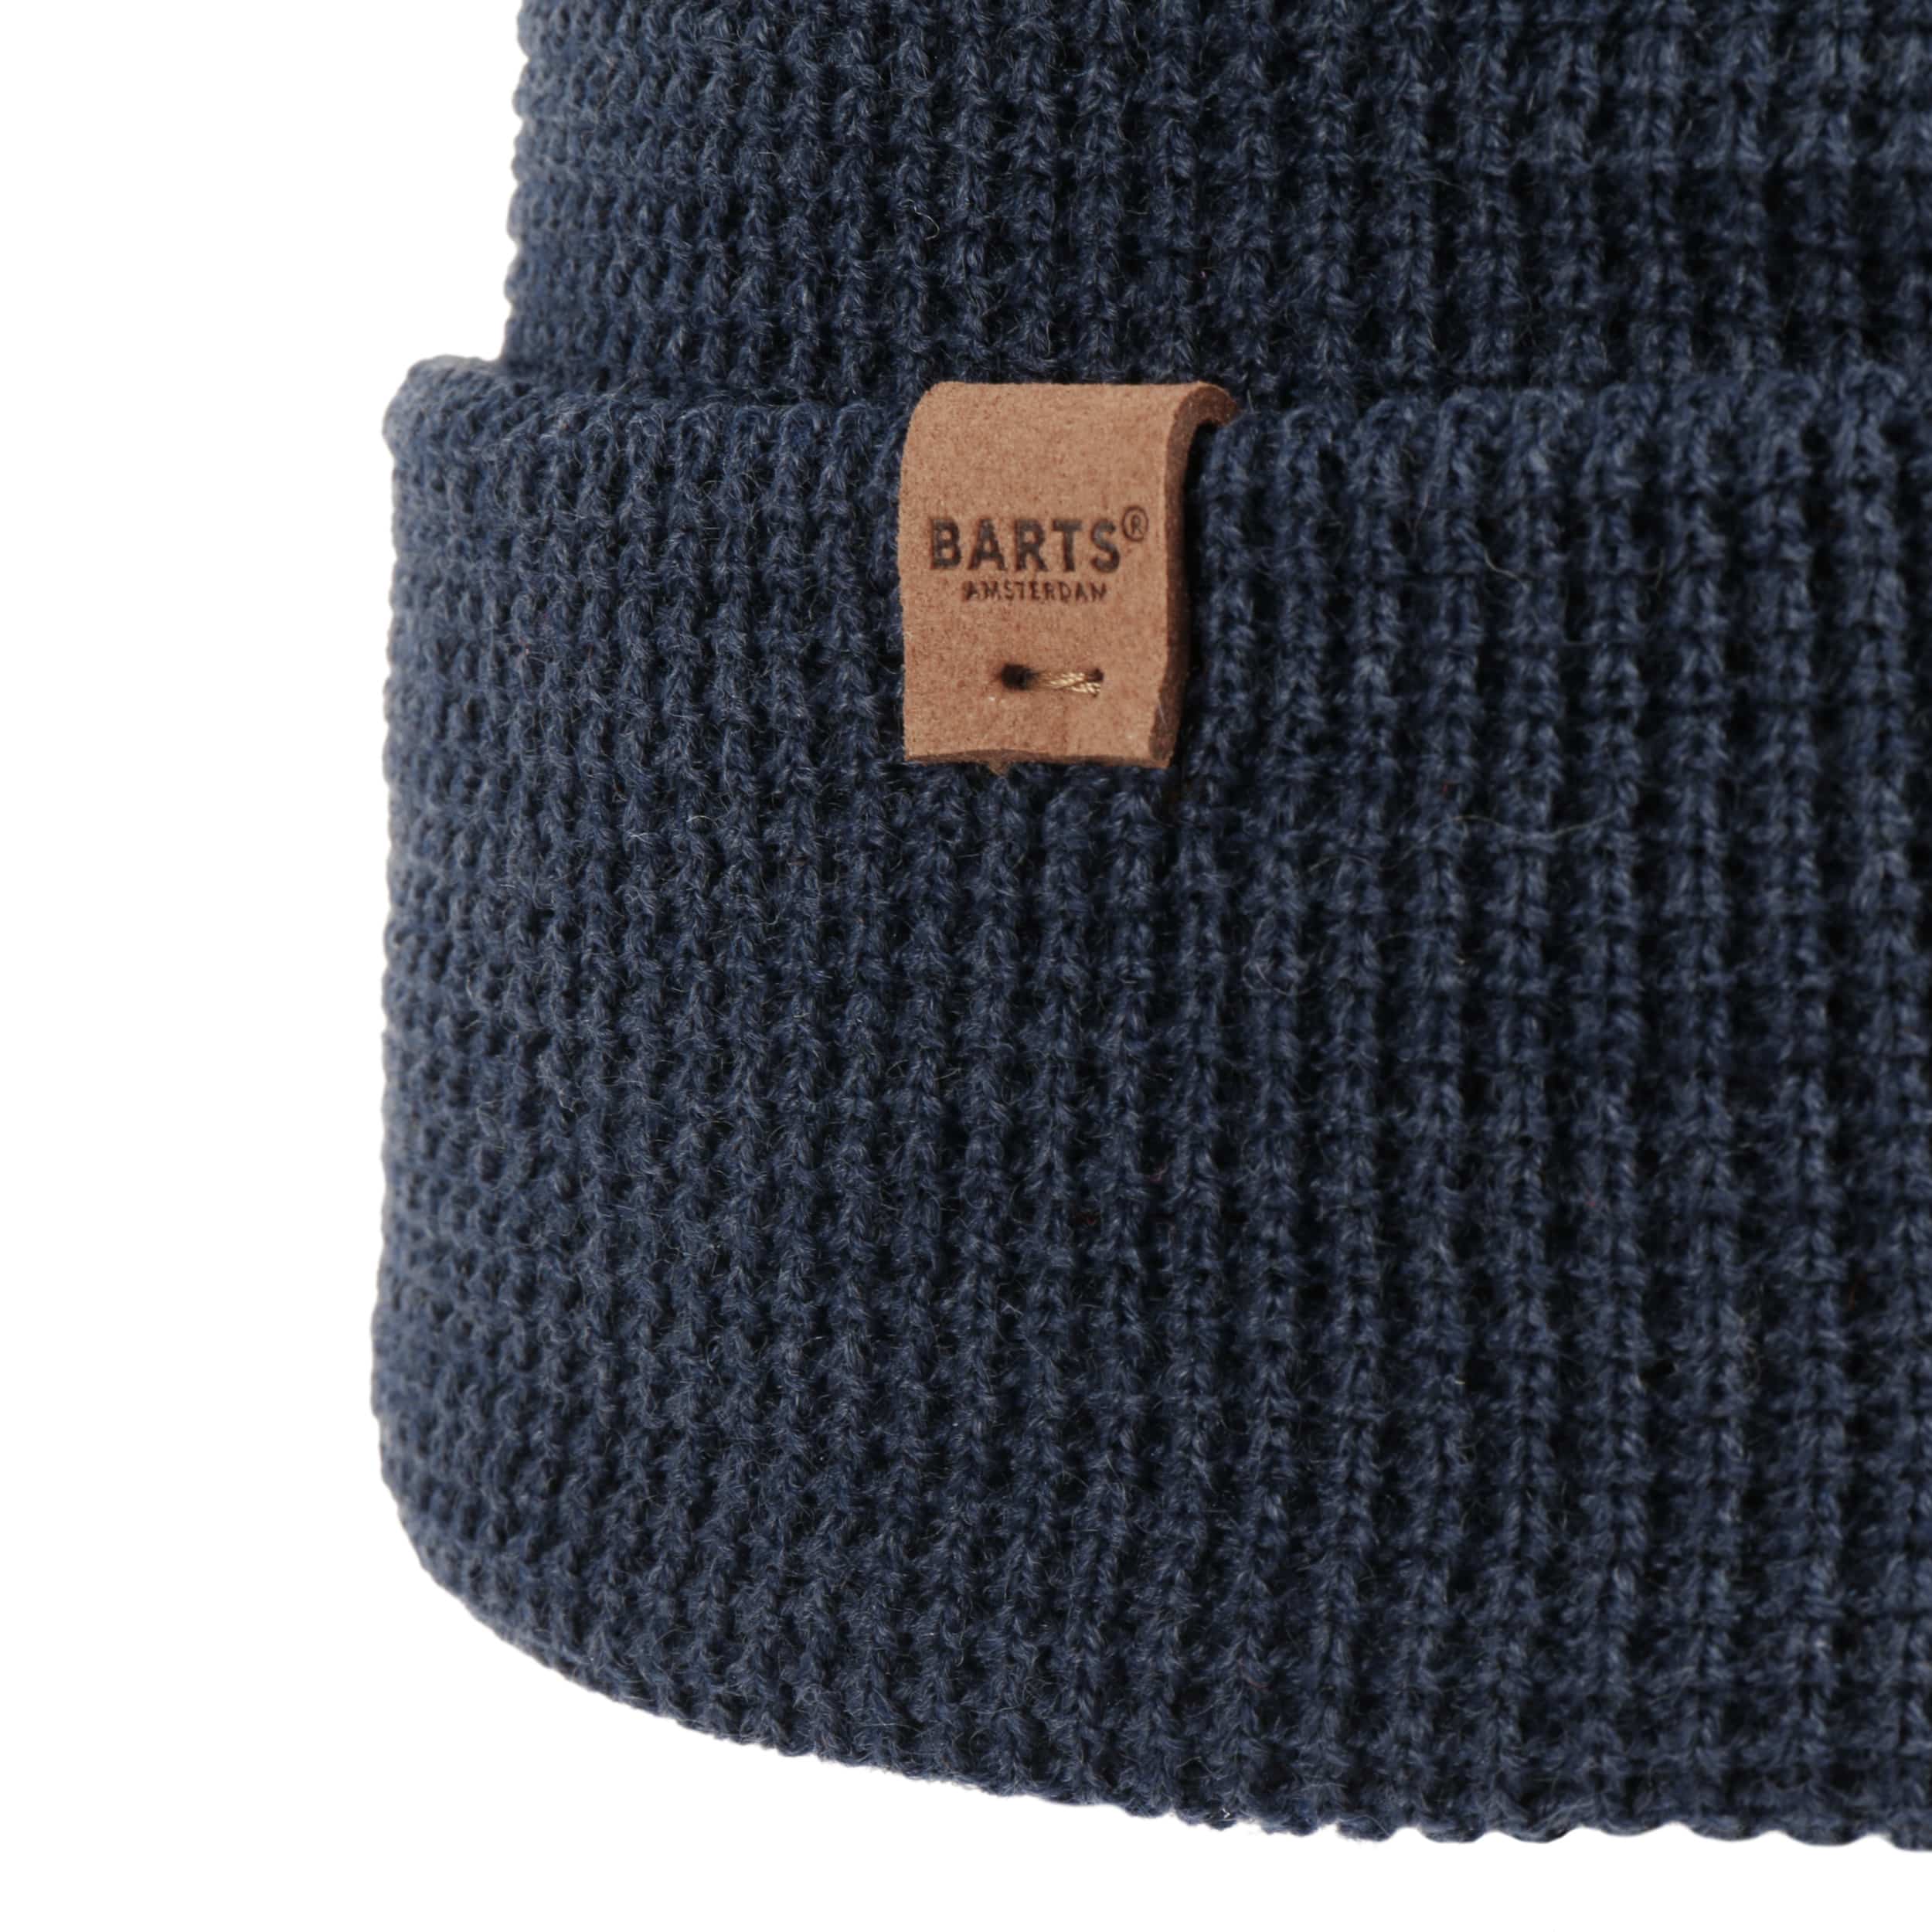 Antrag Coler Beanie € 26,95 Barts - Hat by